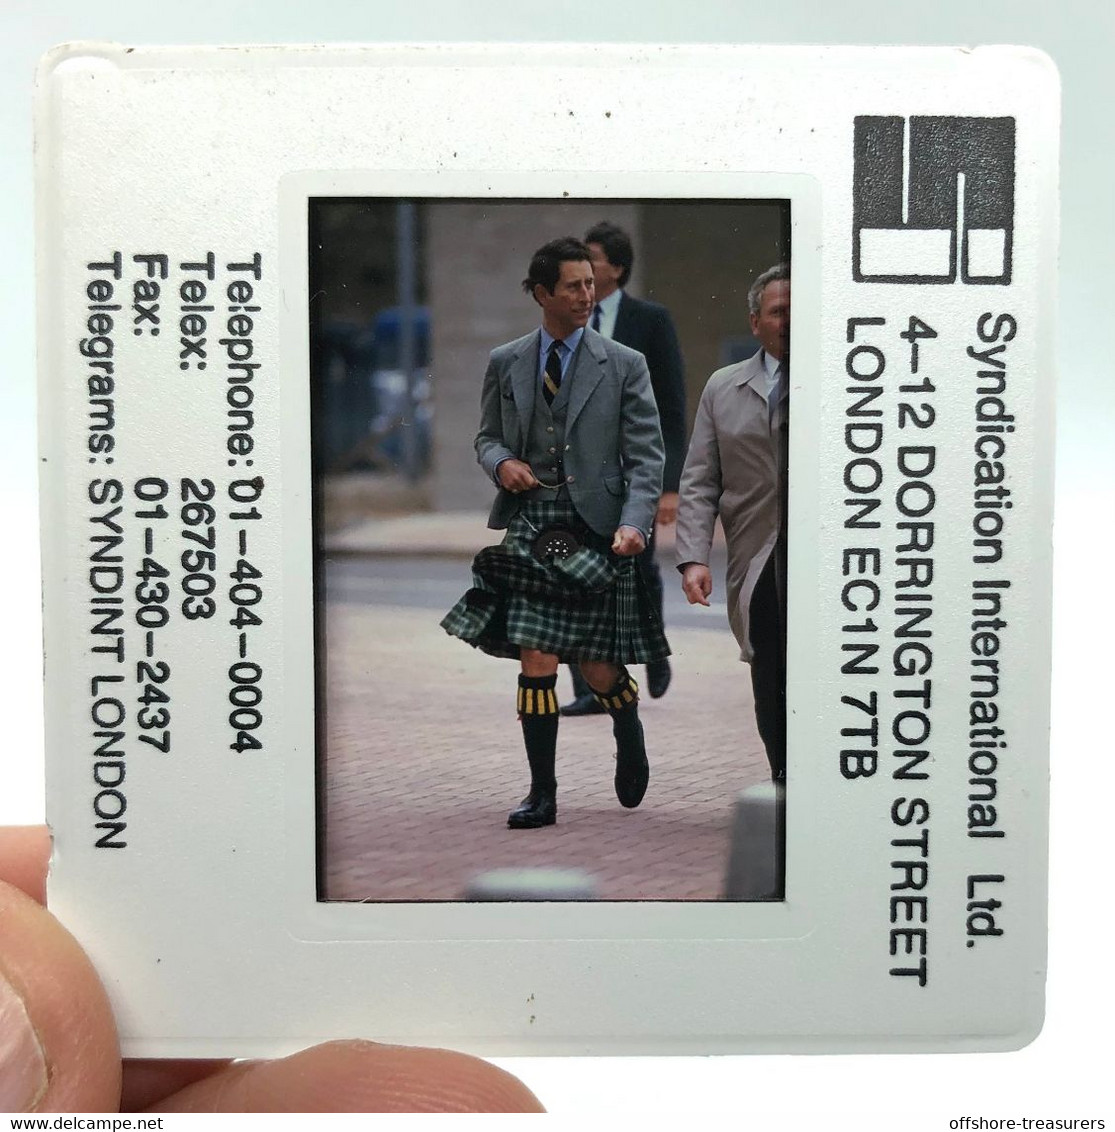 British Royal Family England 1986 Charles Prince of Wales Color Slide at Kinlochbervie Port Scotland